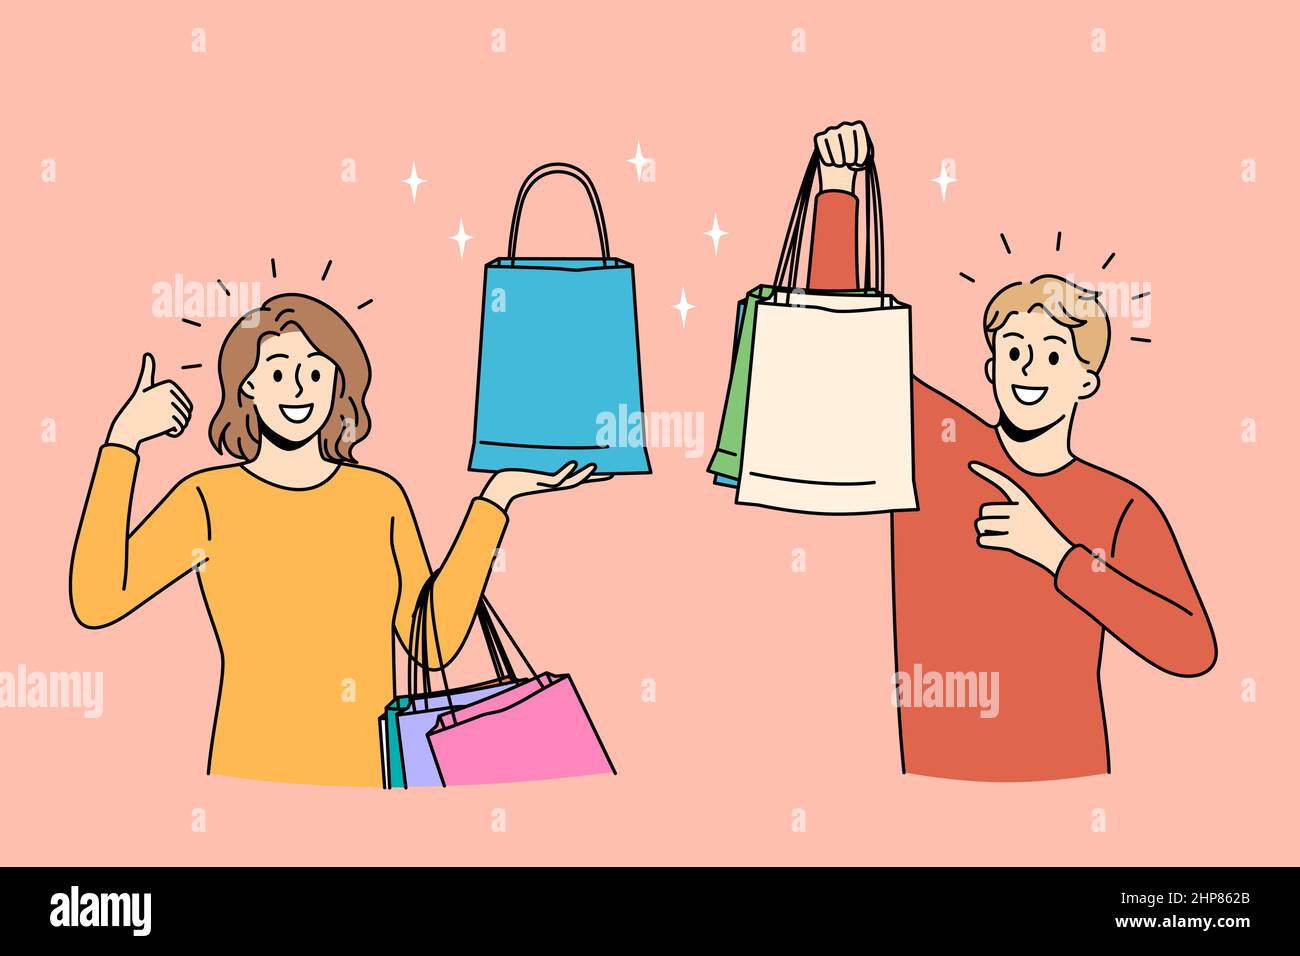 Happy shopping and discounts concept. Stock Vector